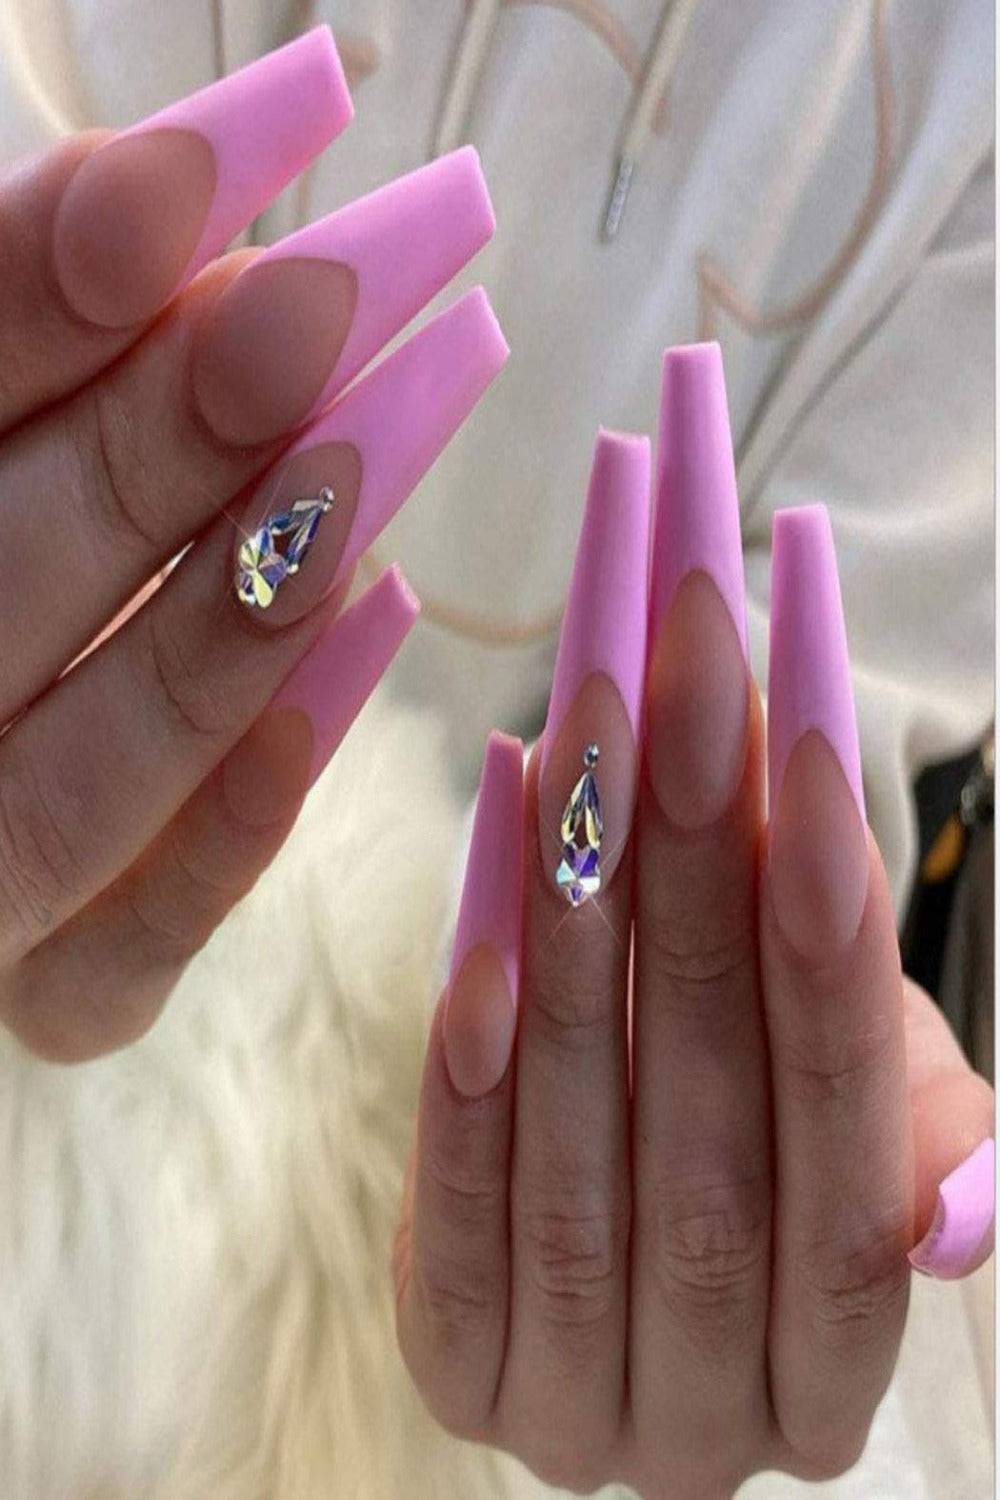 Matte Pink Coffin French Tip Press On Nails With Crystal Nails Design - TGC Boutique - Press On Nails